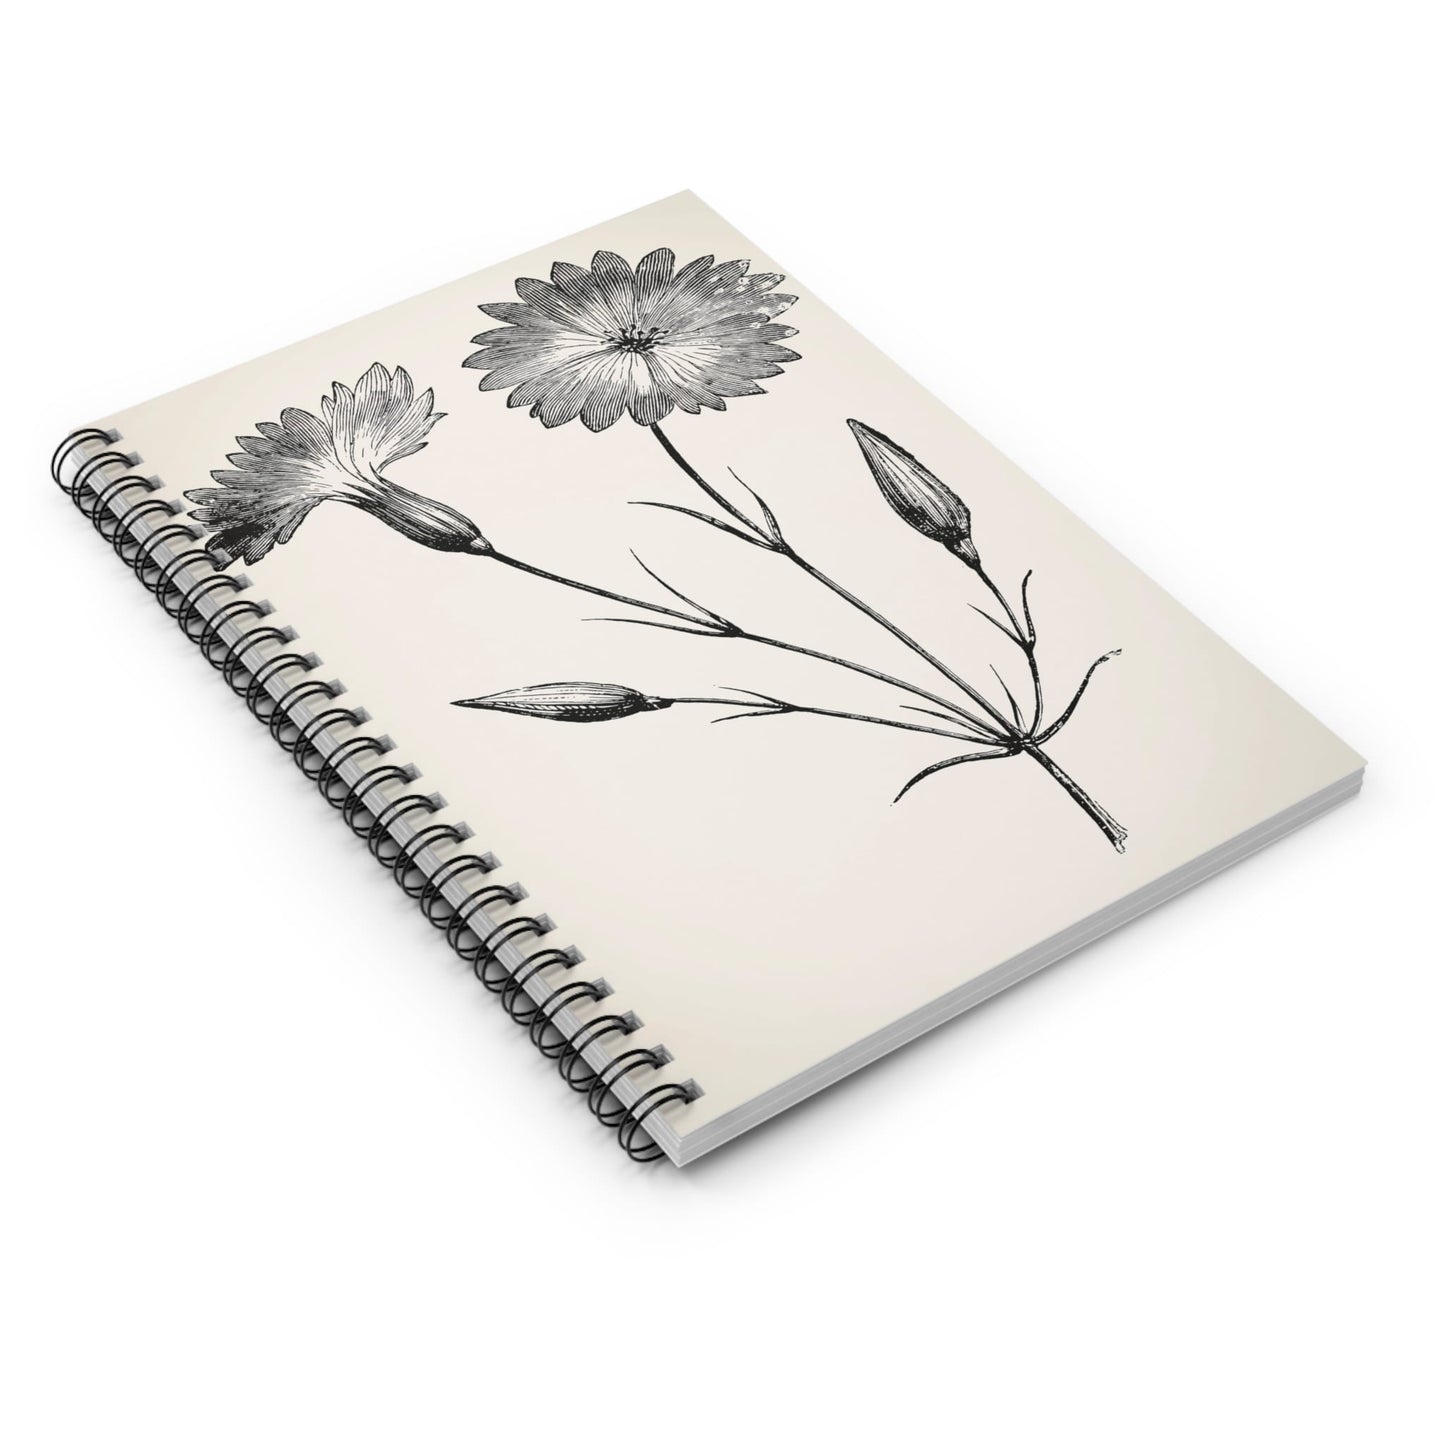 Floral Spiral Notebook Laying Flat on White Surface